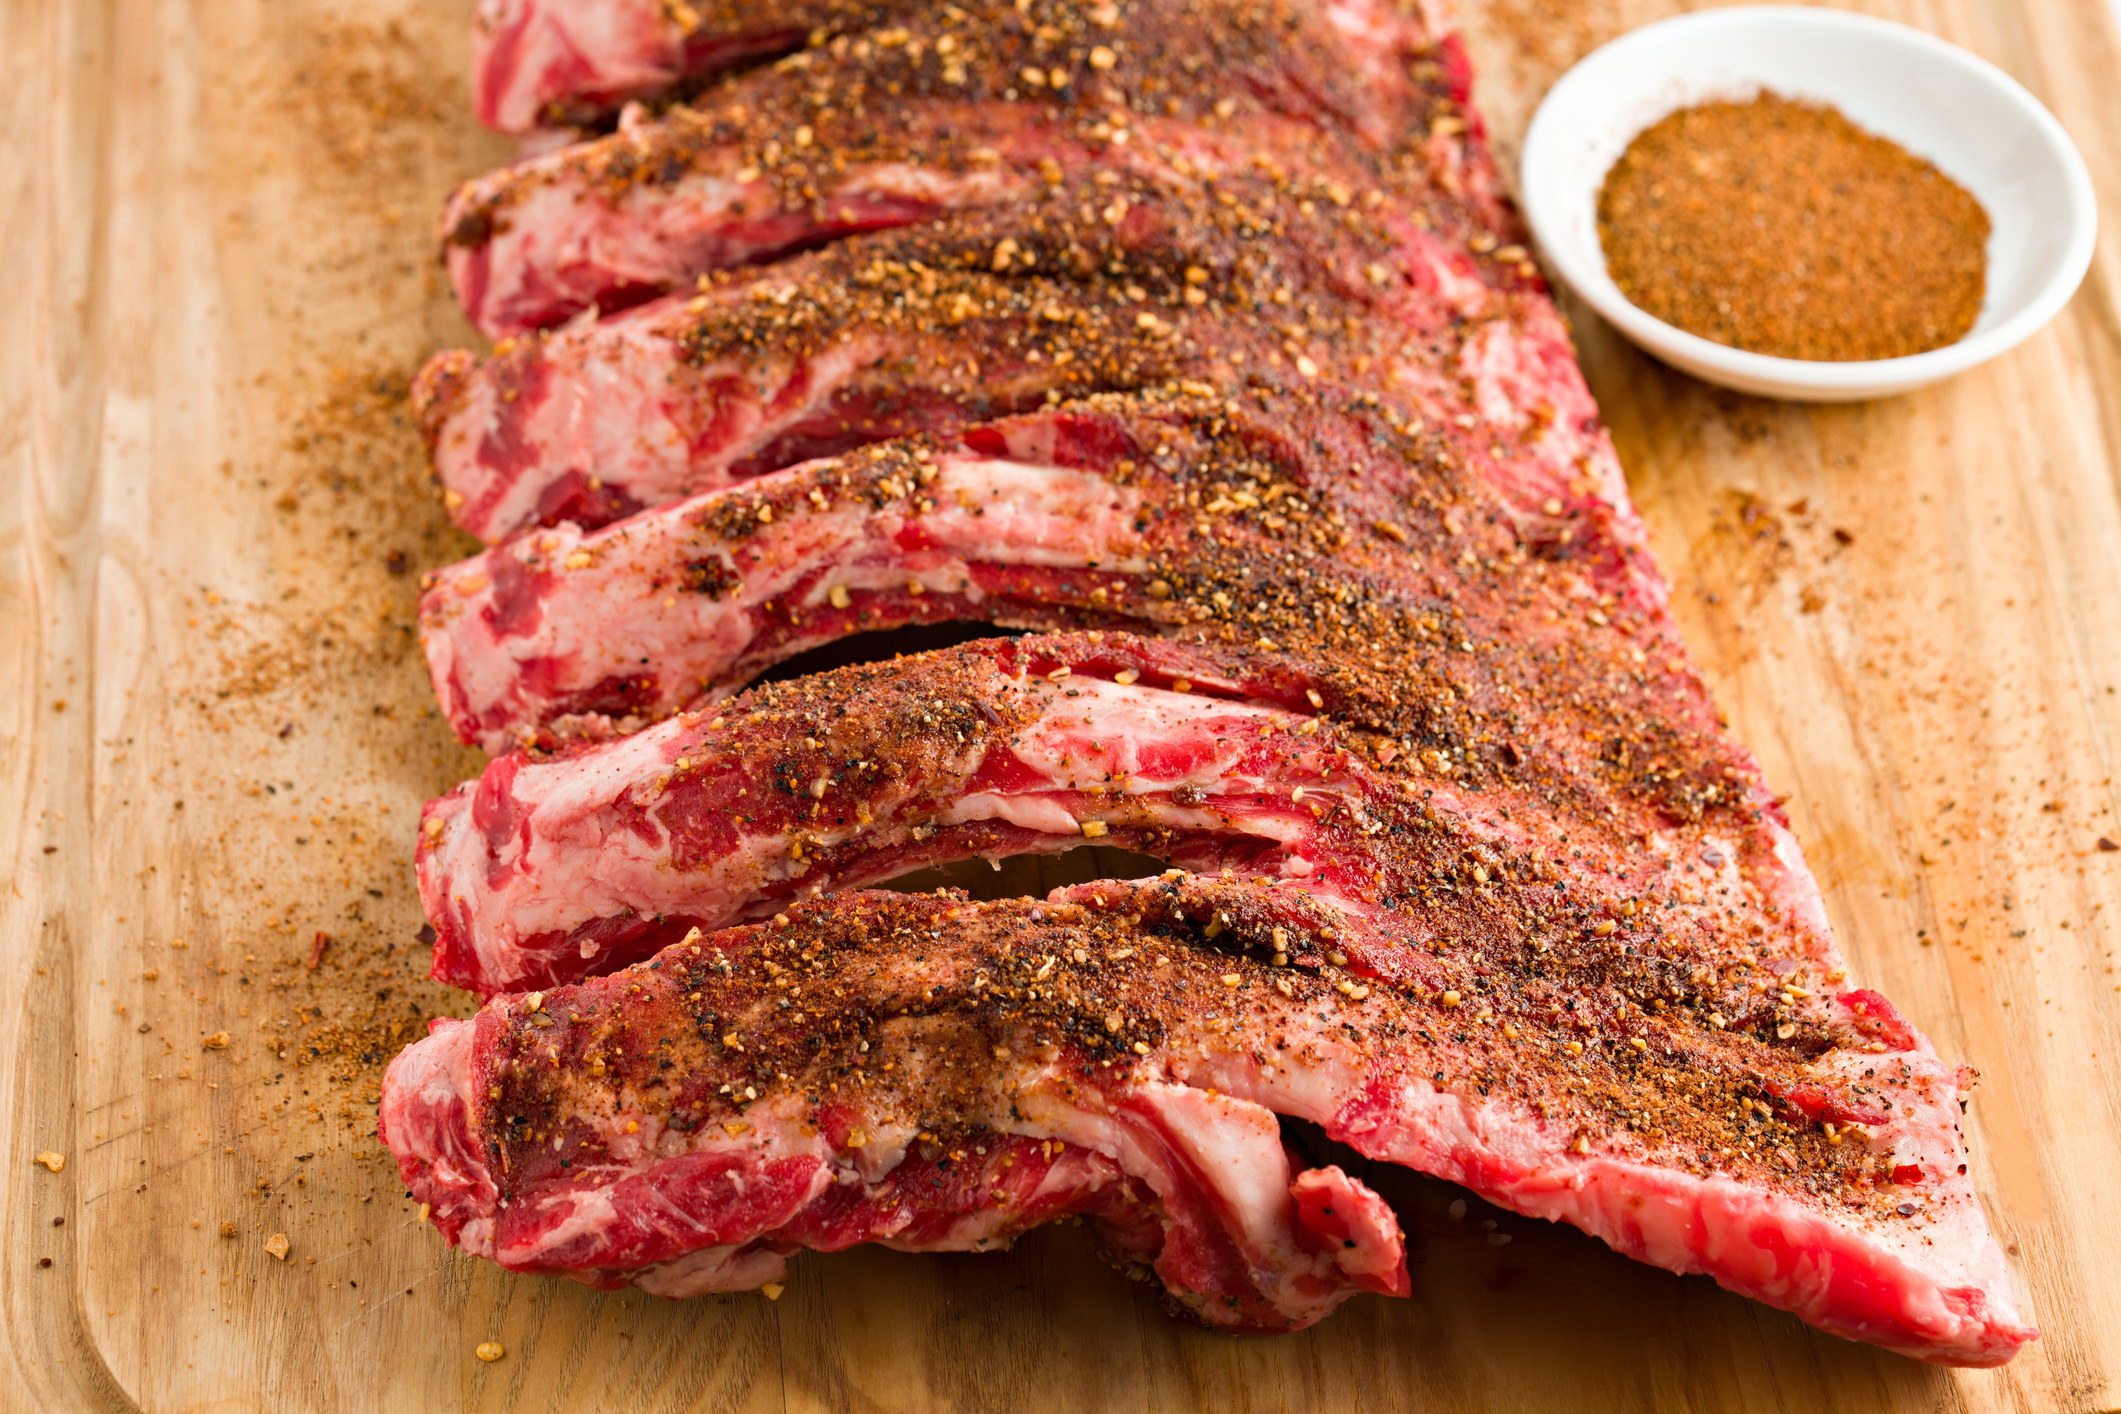 A slab of ribs with a dry rub